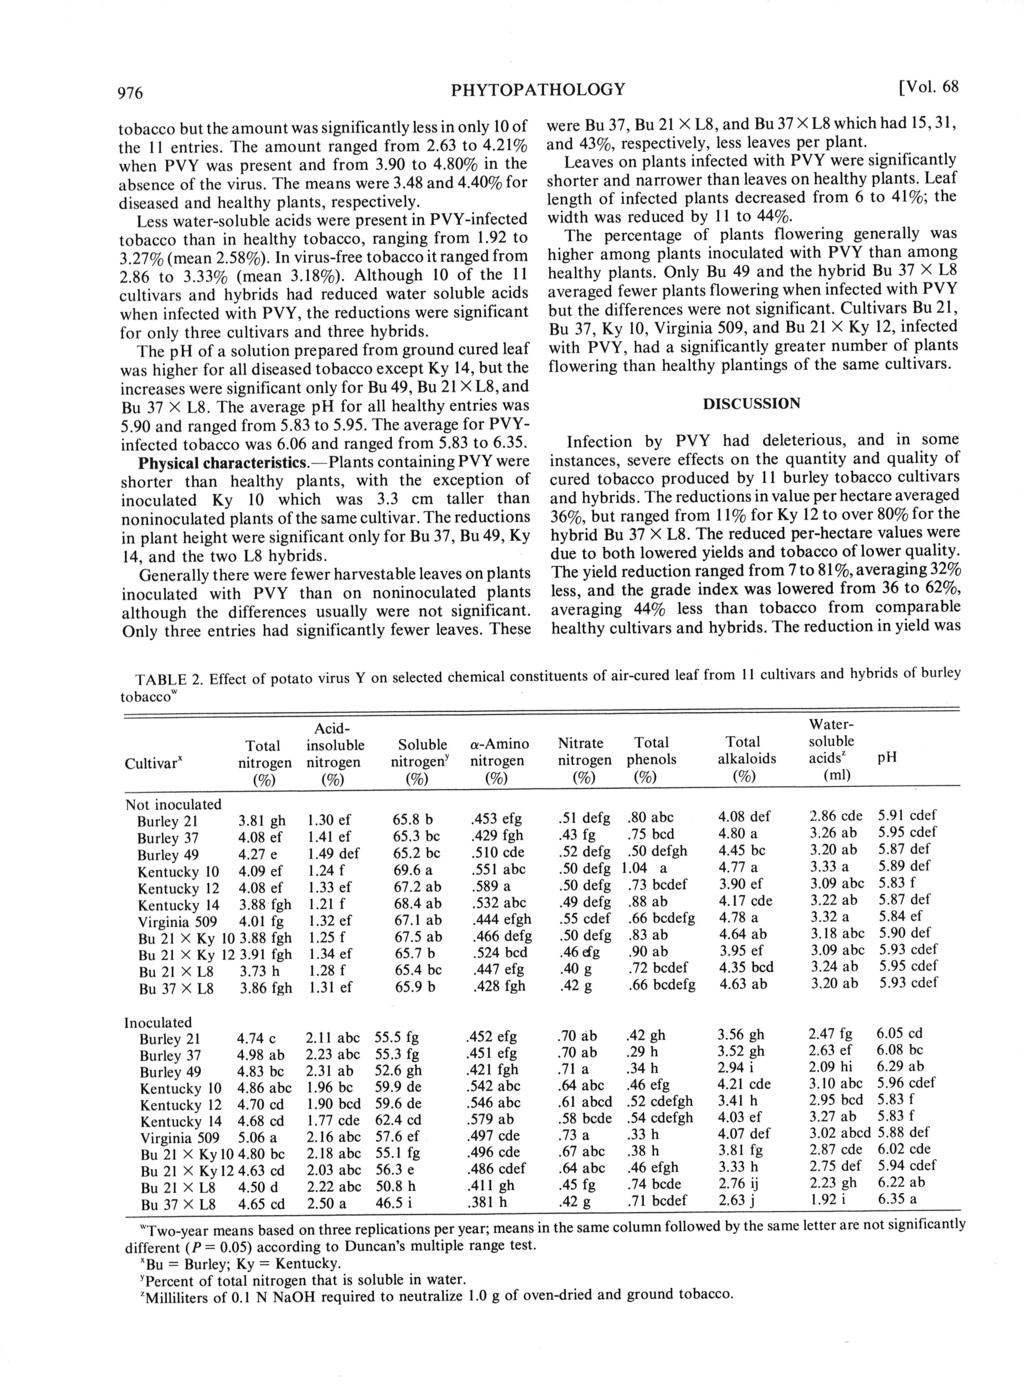 [Vol. 68 PHYTOPATHOLOGY 976 toco ut the mountws significntly less in only 10of the 11 entries. The mount rnged from 2.63 to 4.21% when PVY ws present nd from 3.90 to 4.80% in the sence of the virus.